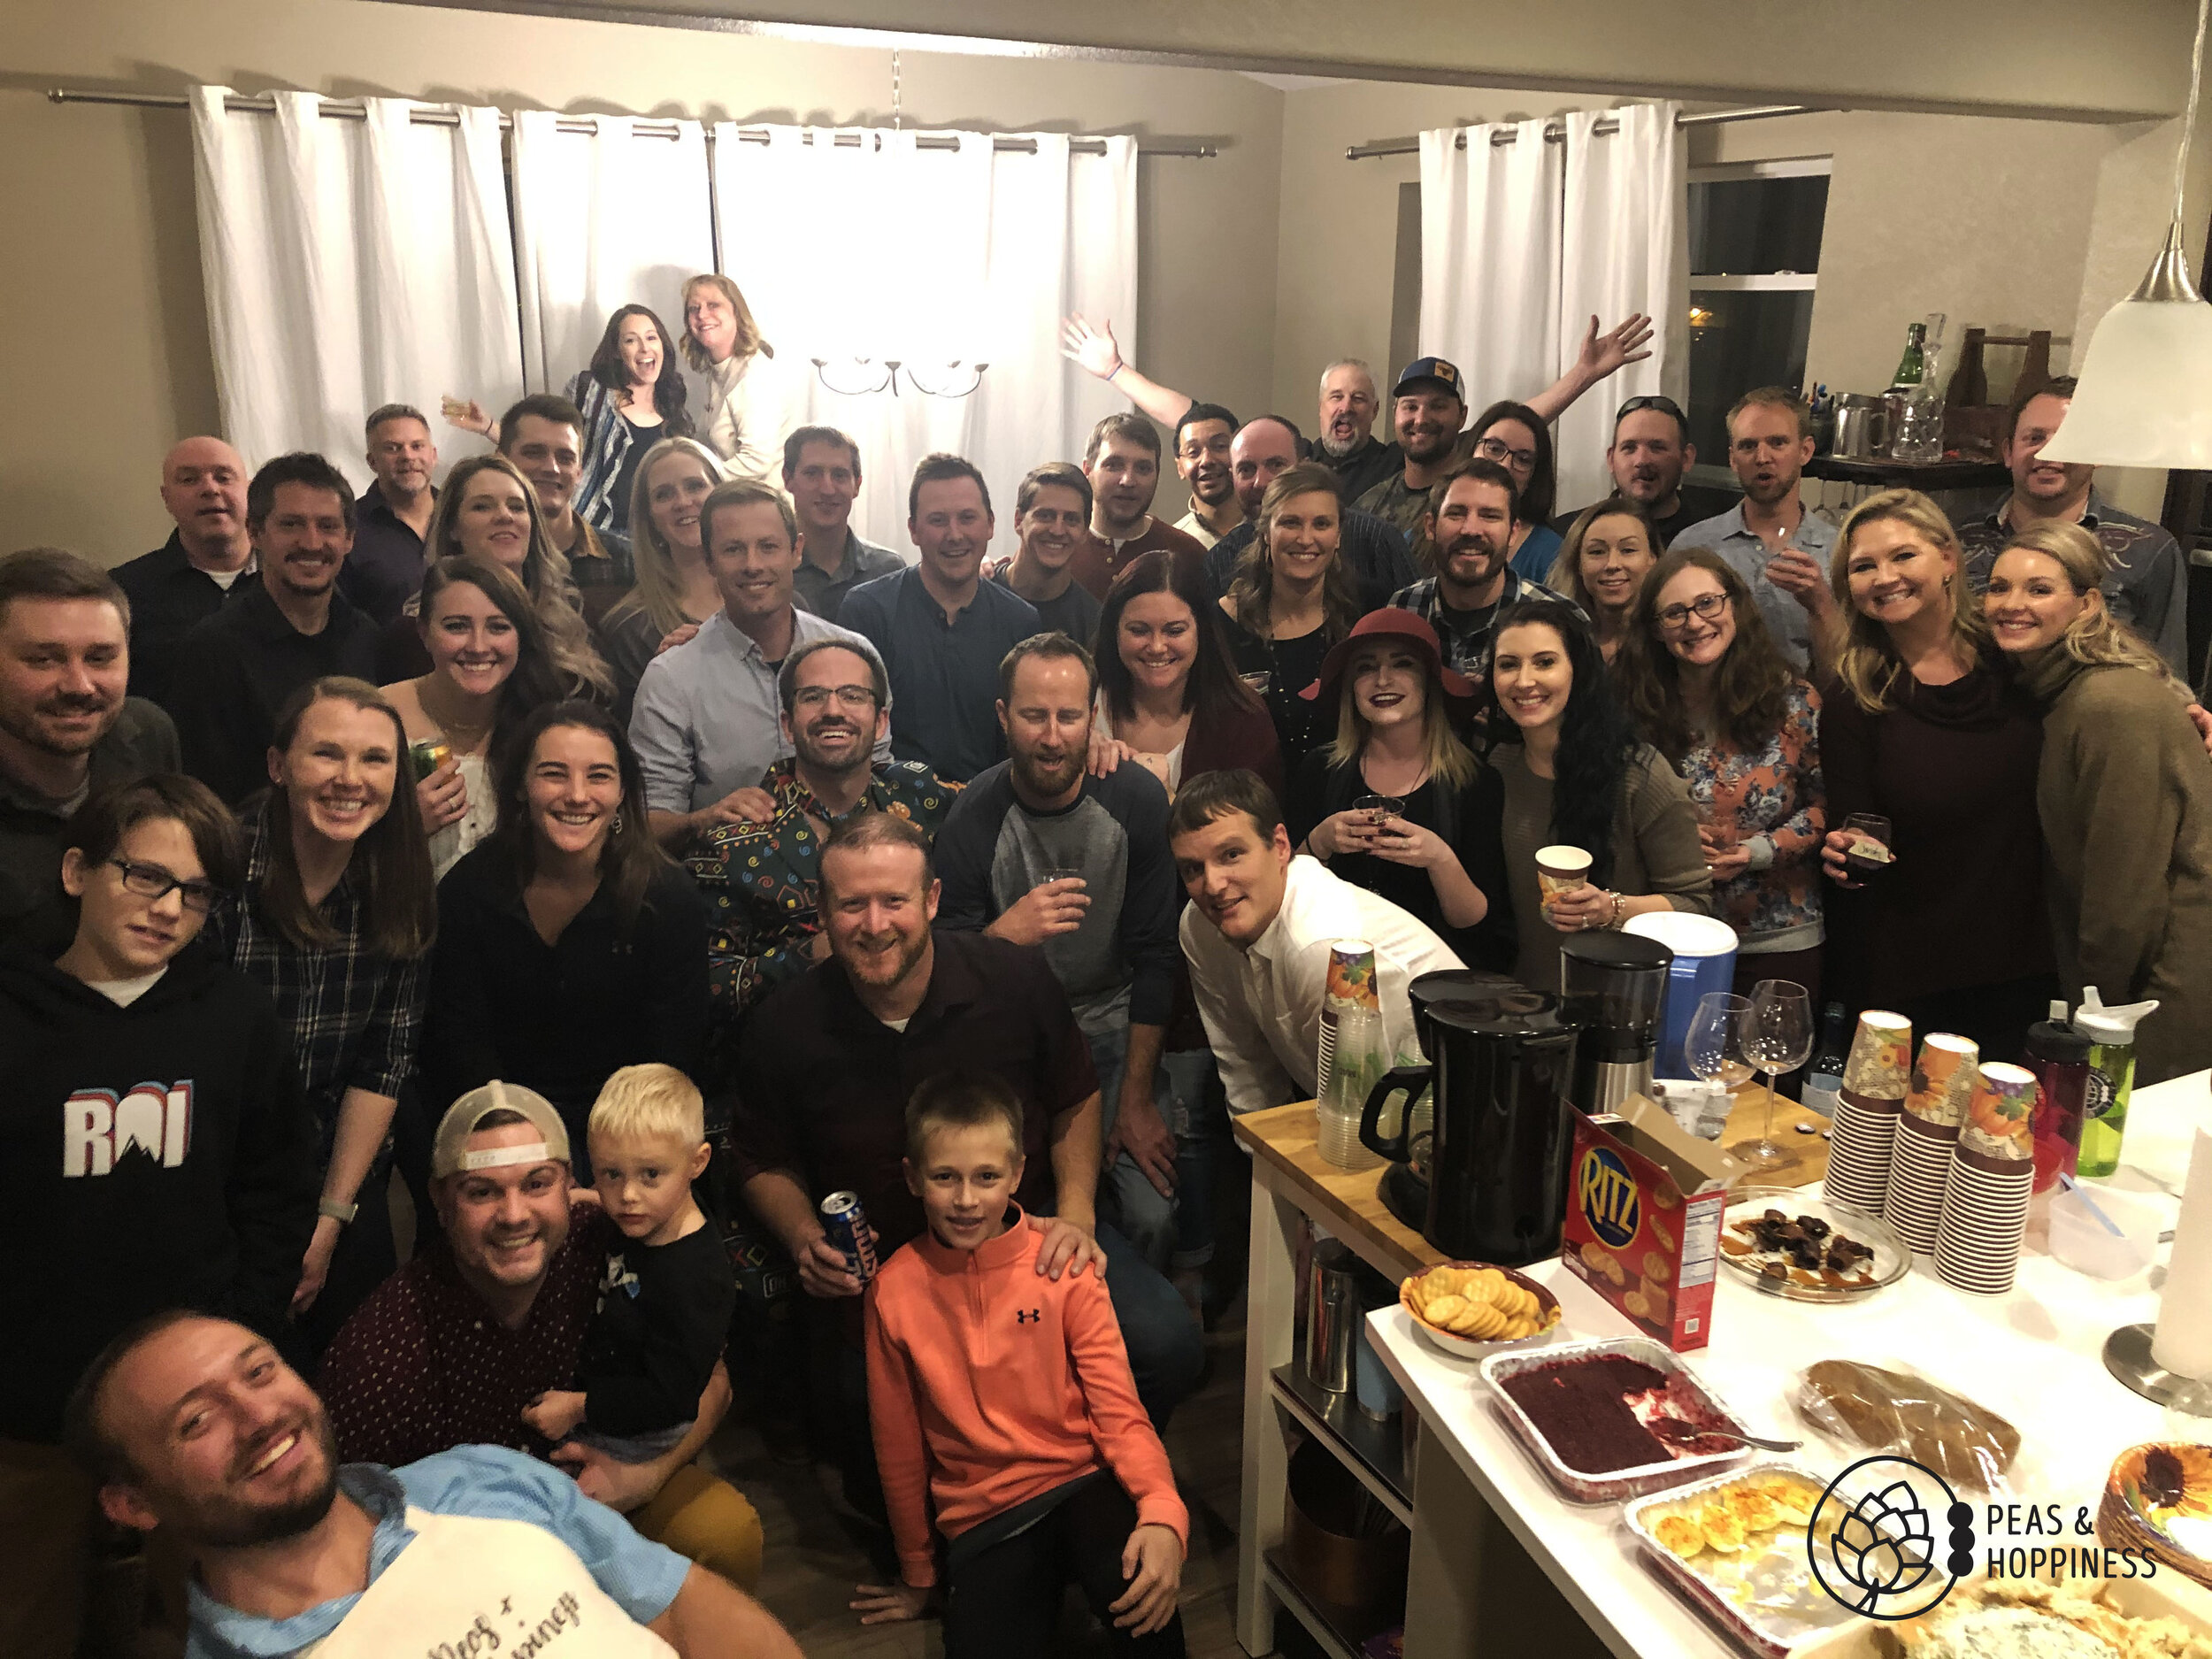 Friendsgiving 2019 in our home, my favorite holiday of the year!